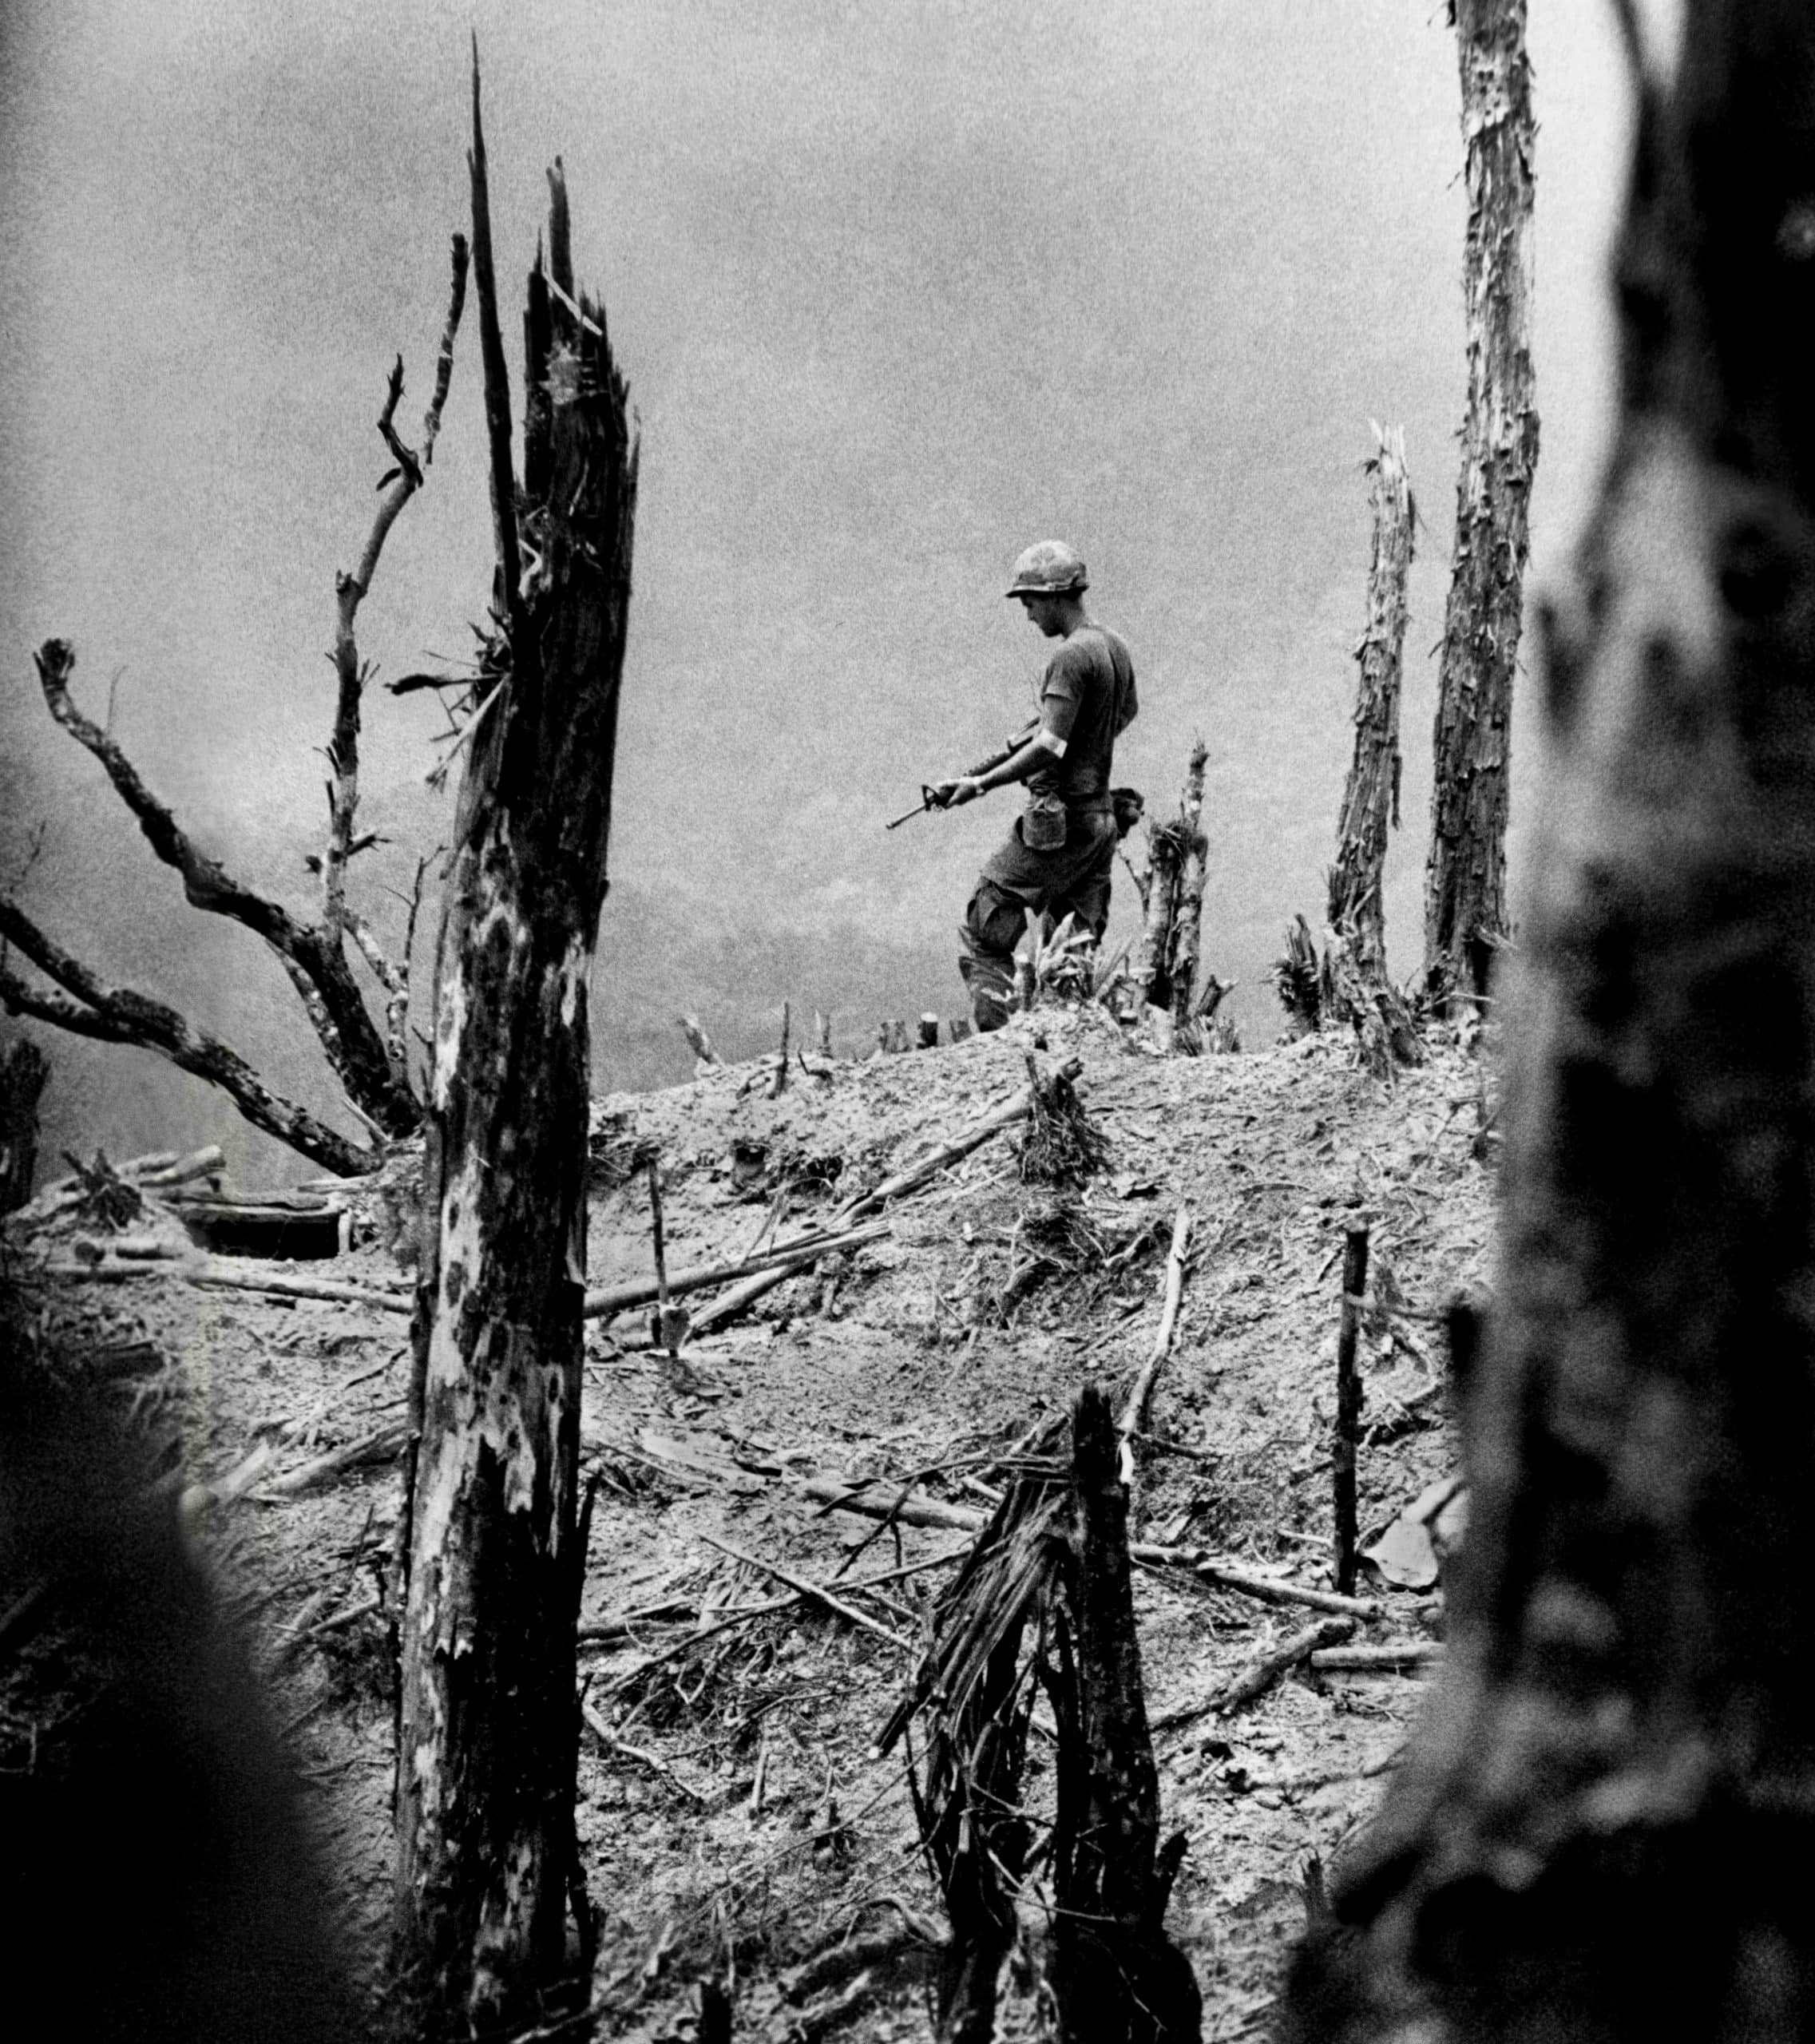 Lone Soldier above A Shau Valley, S. Vietnam, 1971
One of the photos from David Hume Kennerly's portfolio that won the 1972 Pulitzer Prize in Journalism for Feature Photography. The Pulitzer committee described this image as showing, Òthe loneliness and desolation of warÓ. "	A Shau Valley, South Vietnam